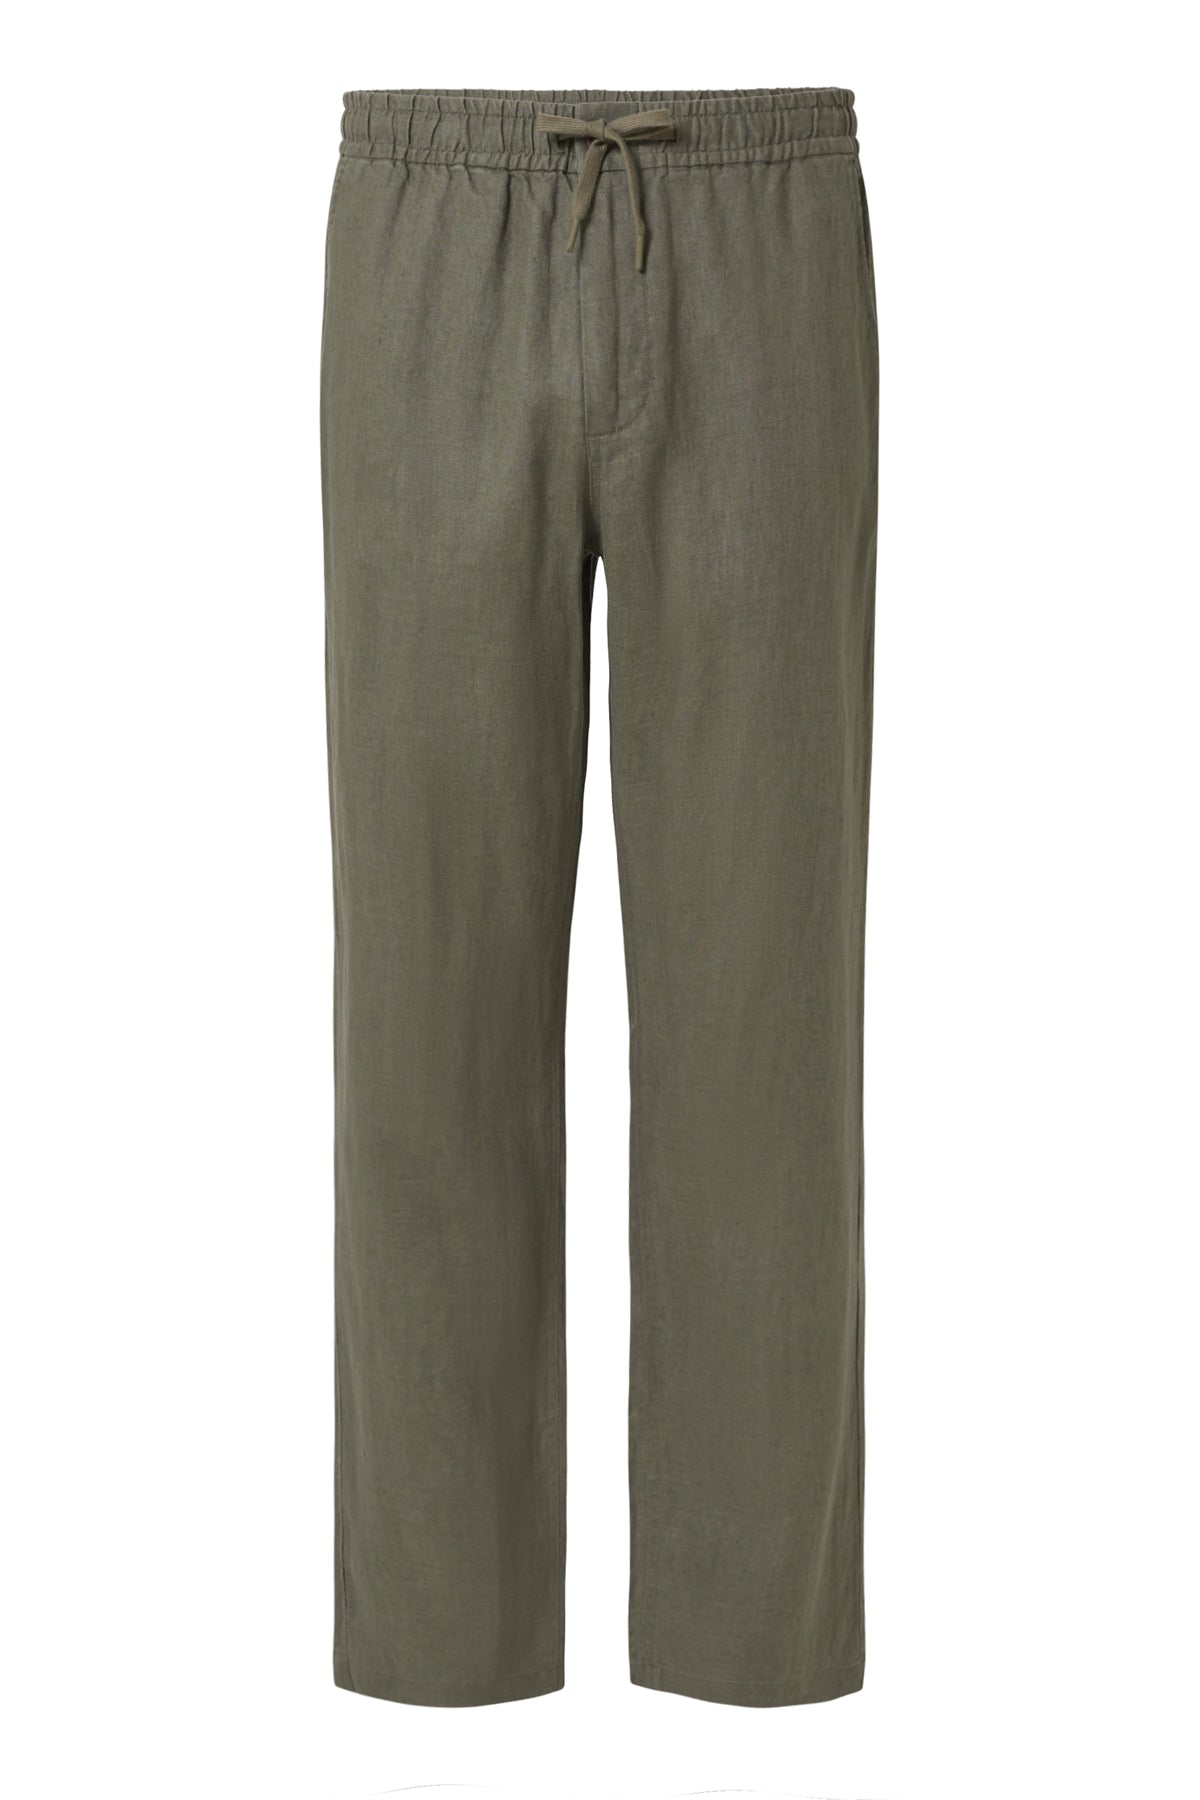 GREEN ETHICA LINEN TROUSERS